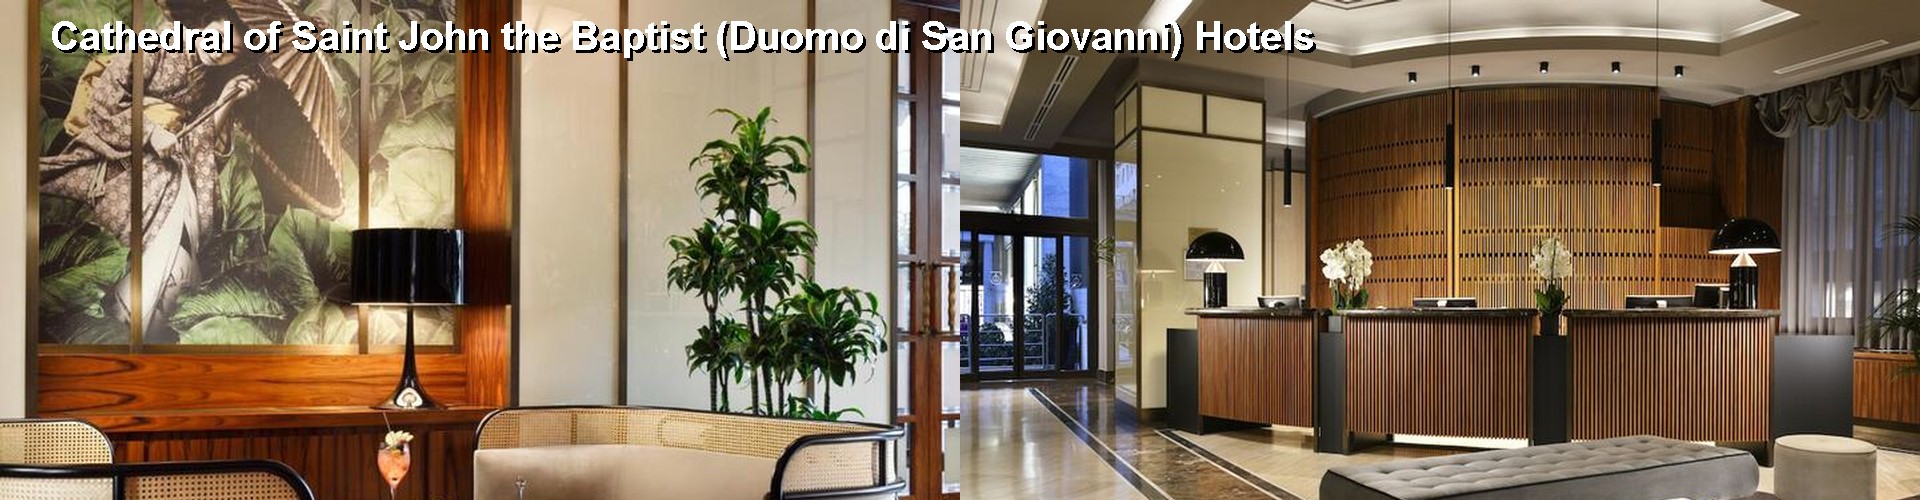 5 Best Hotels near Cathedral of Saint John the Baptist (Duomo di San Giovanni)